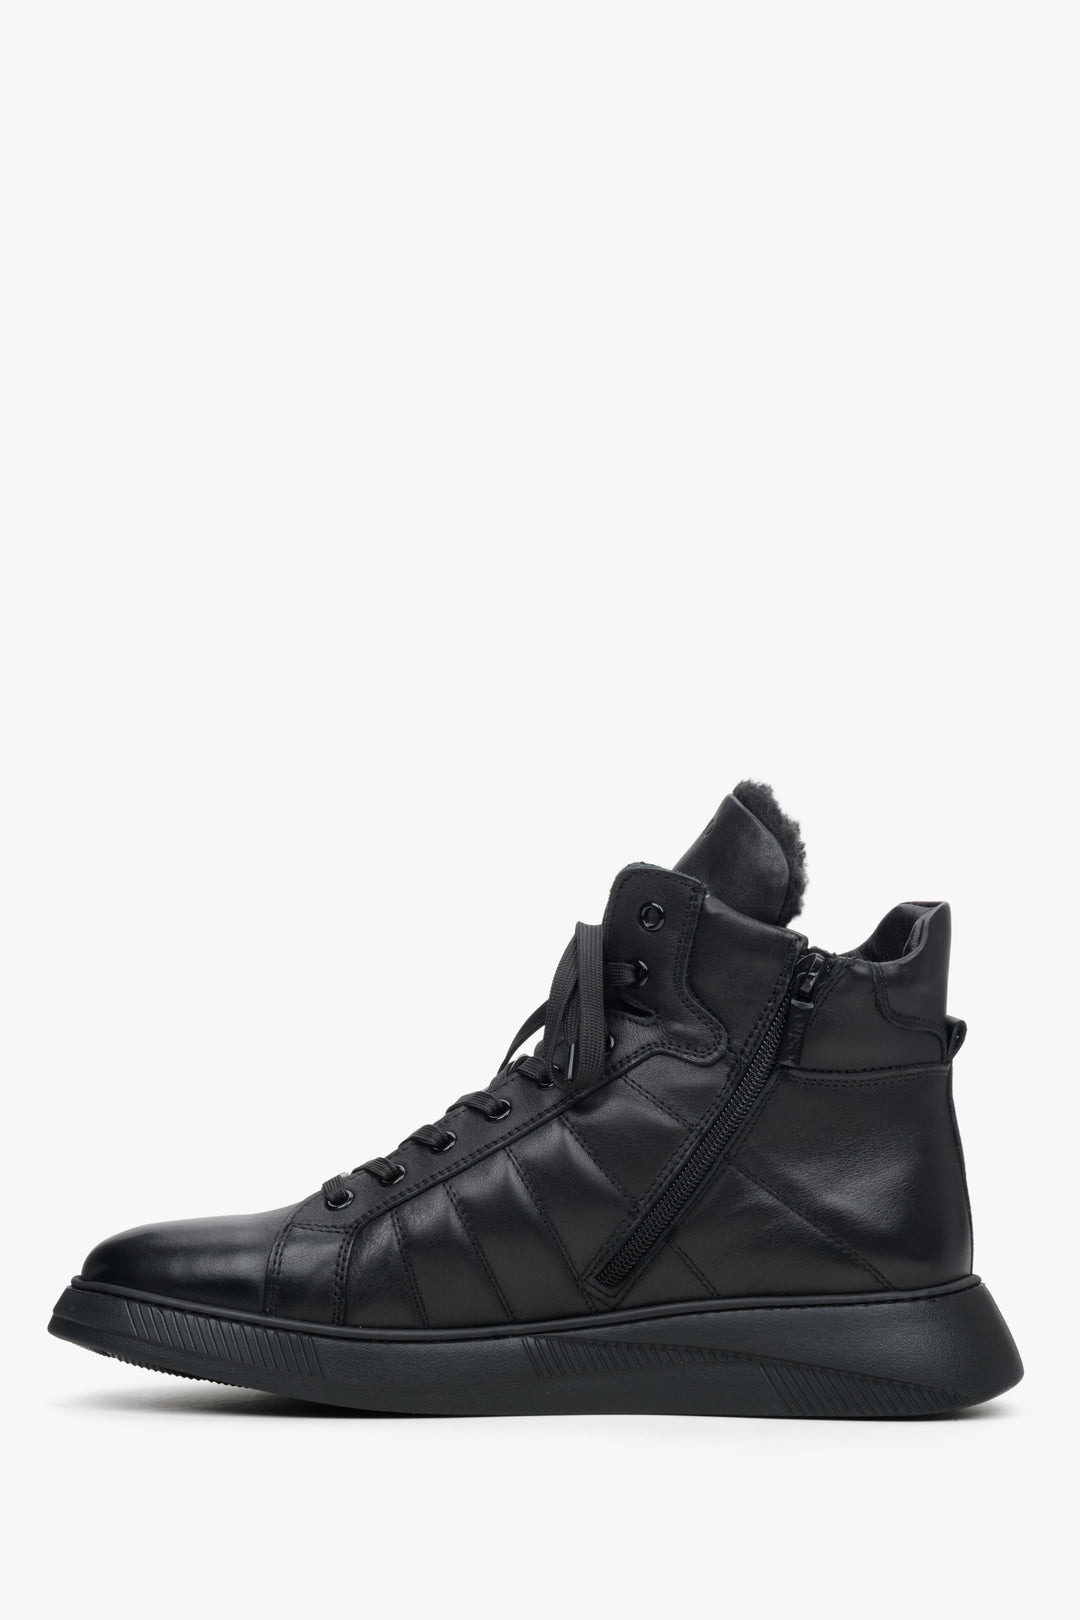 Men's black leather high-top sneakers by Estro - close-up on the profile of the shoe.